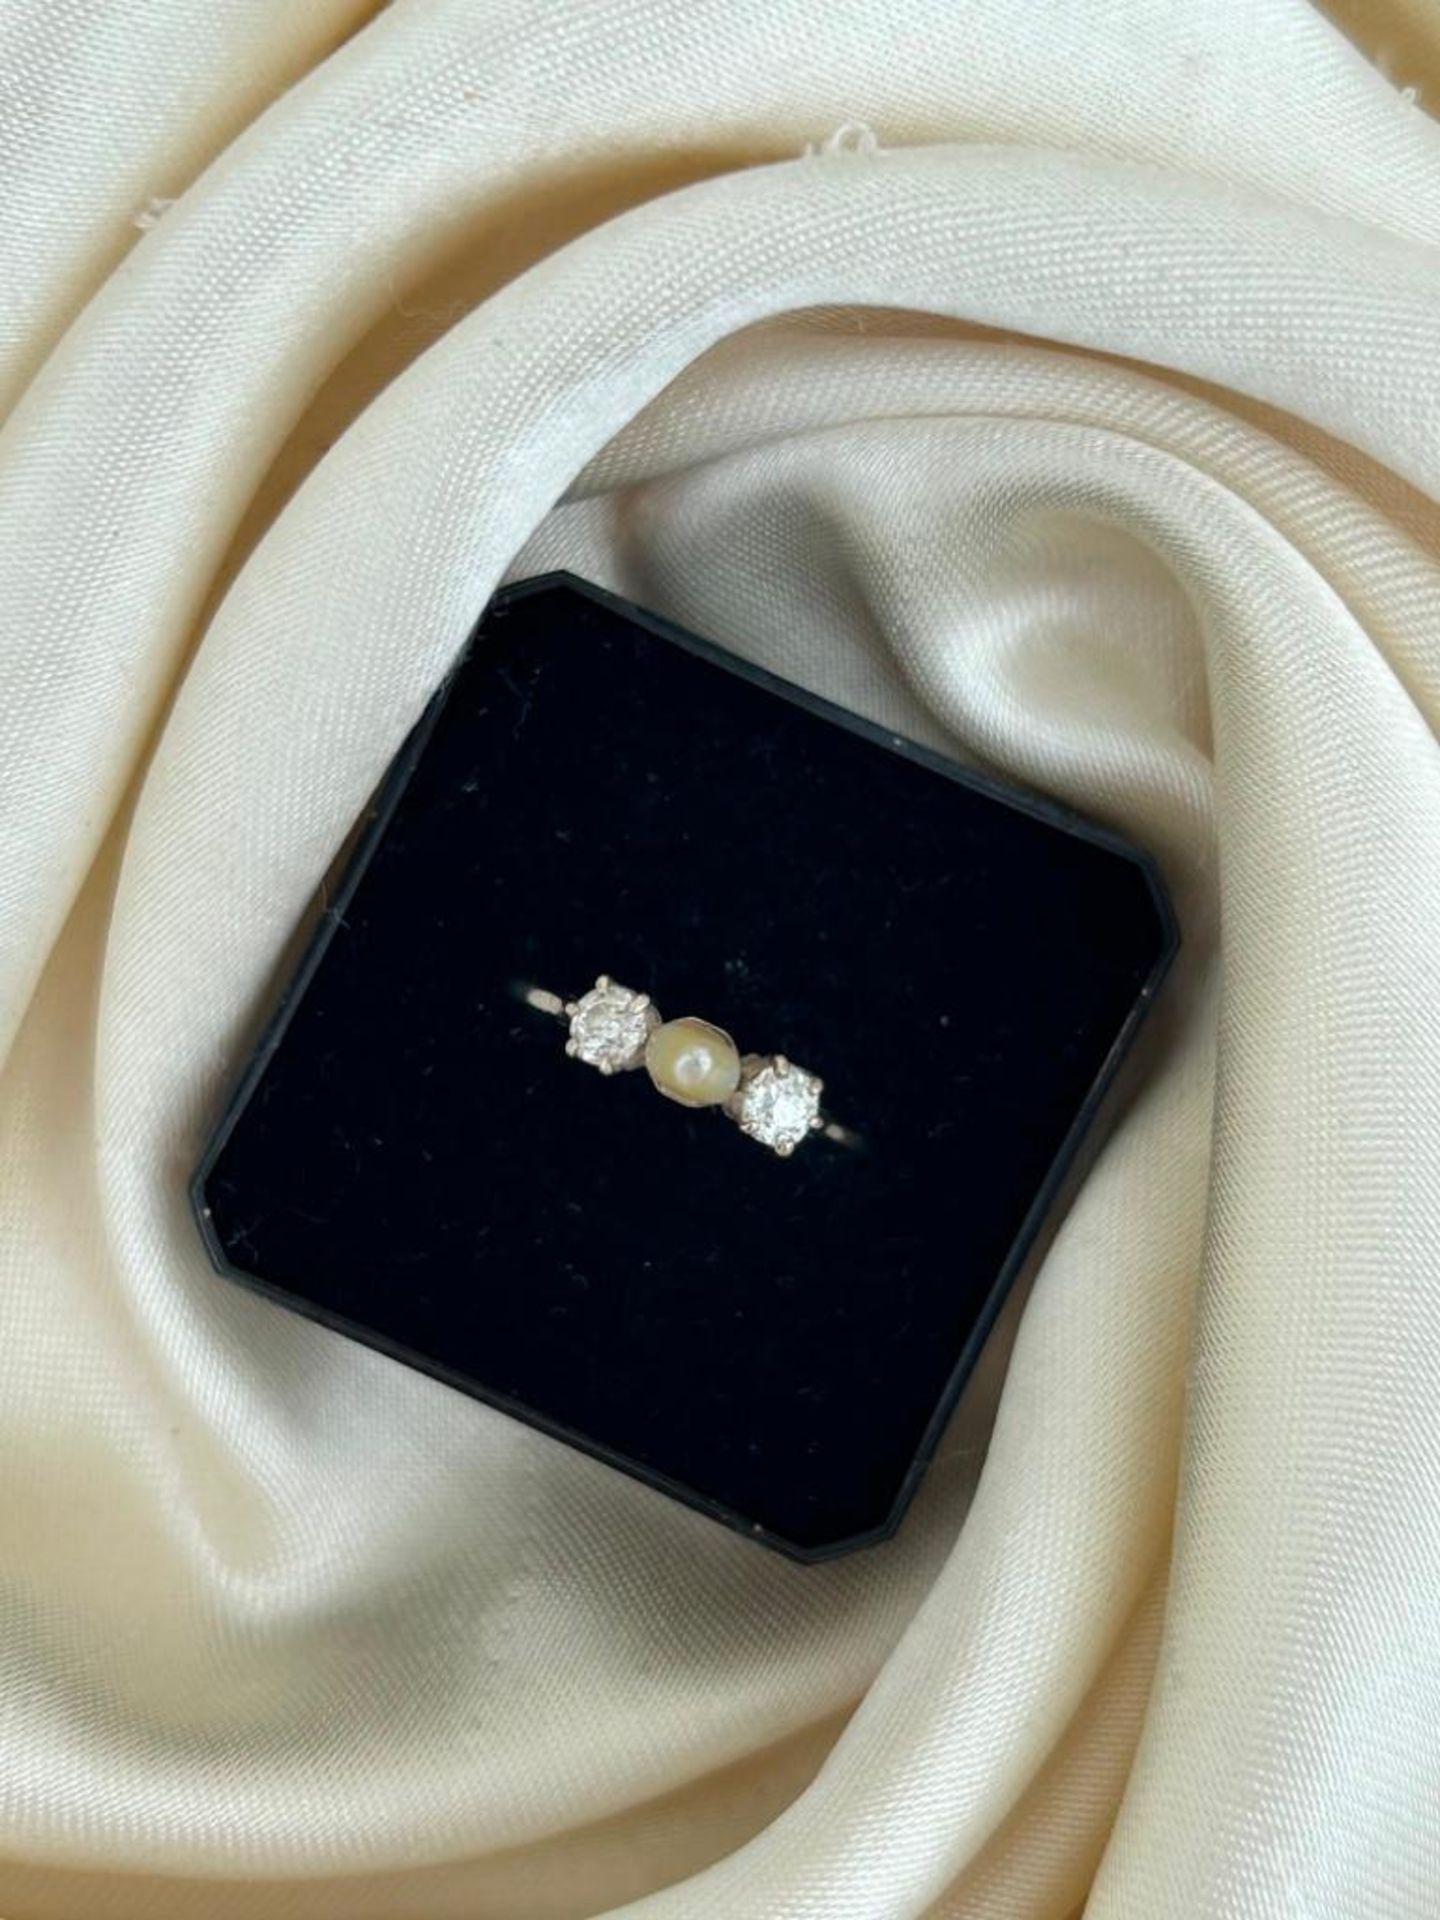 Antique White Gold Pearl and Diamond 3 Stone Ring - Image 6 of 7